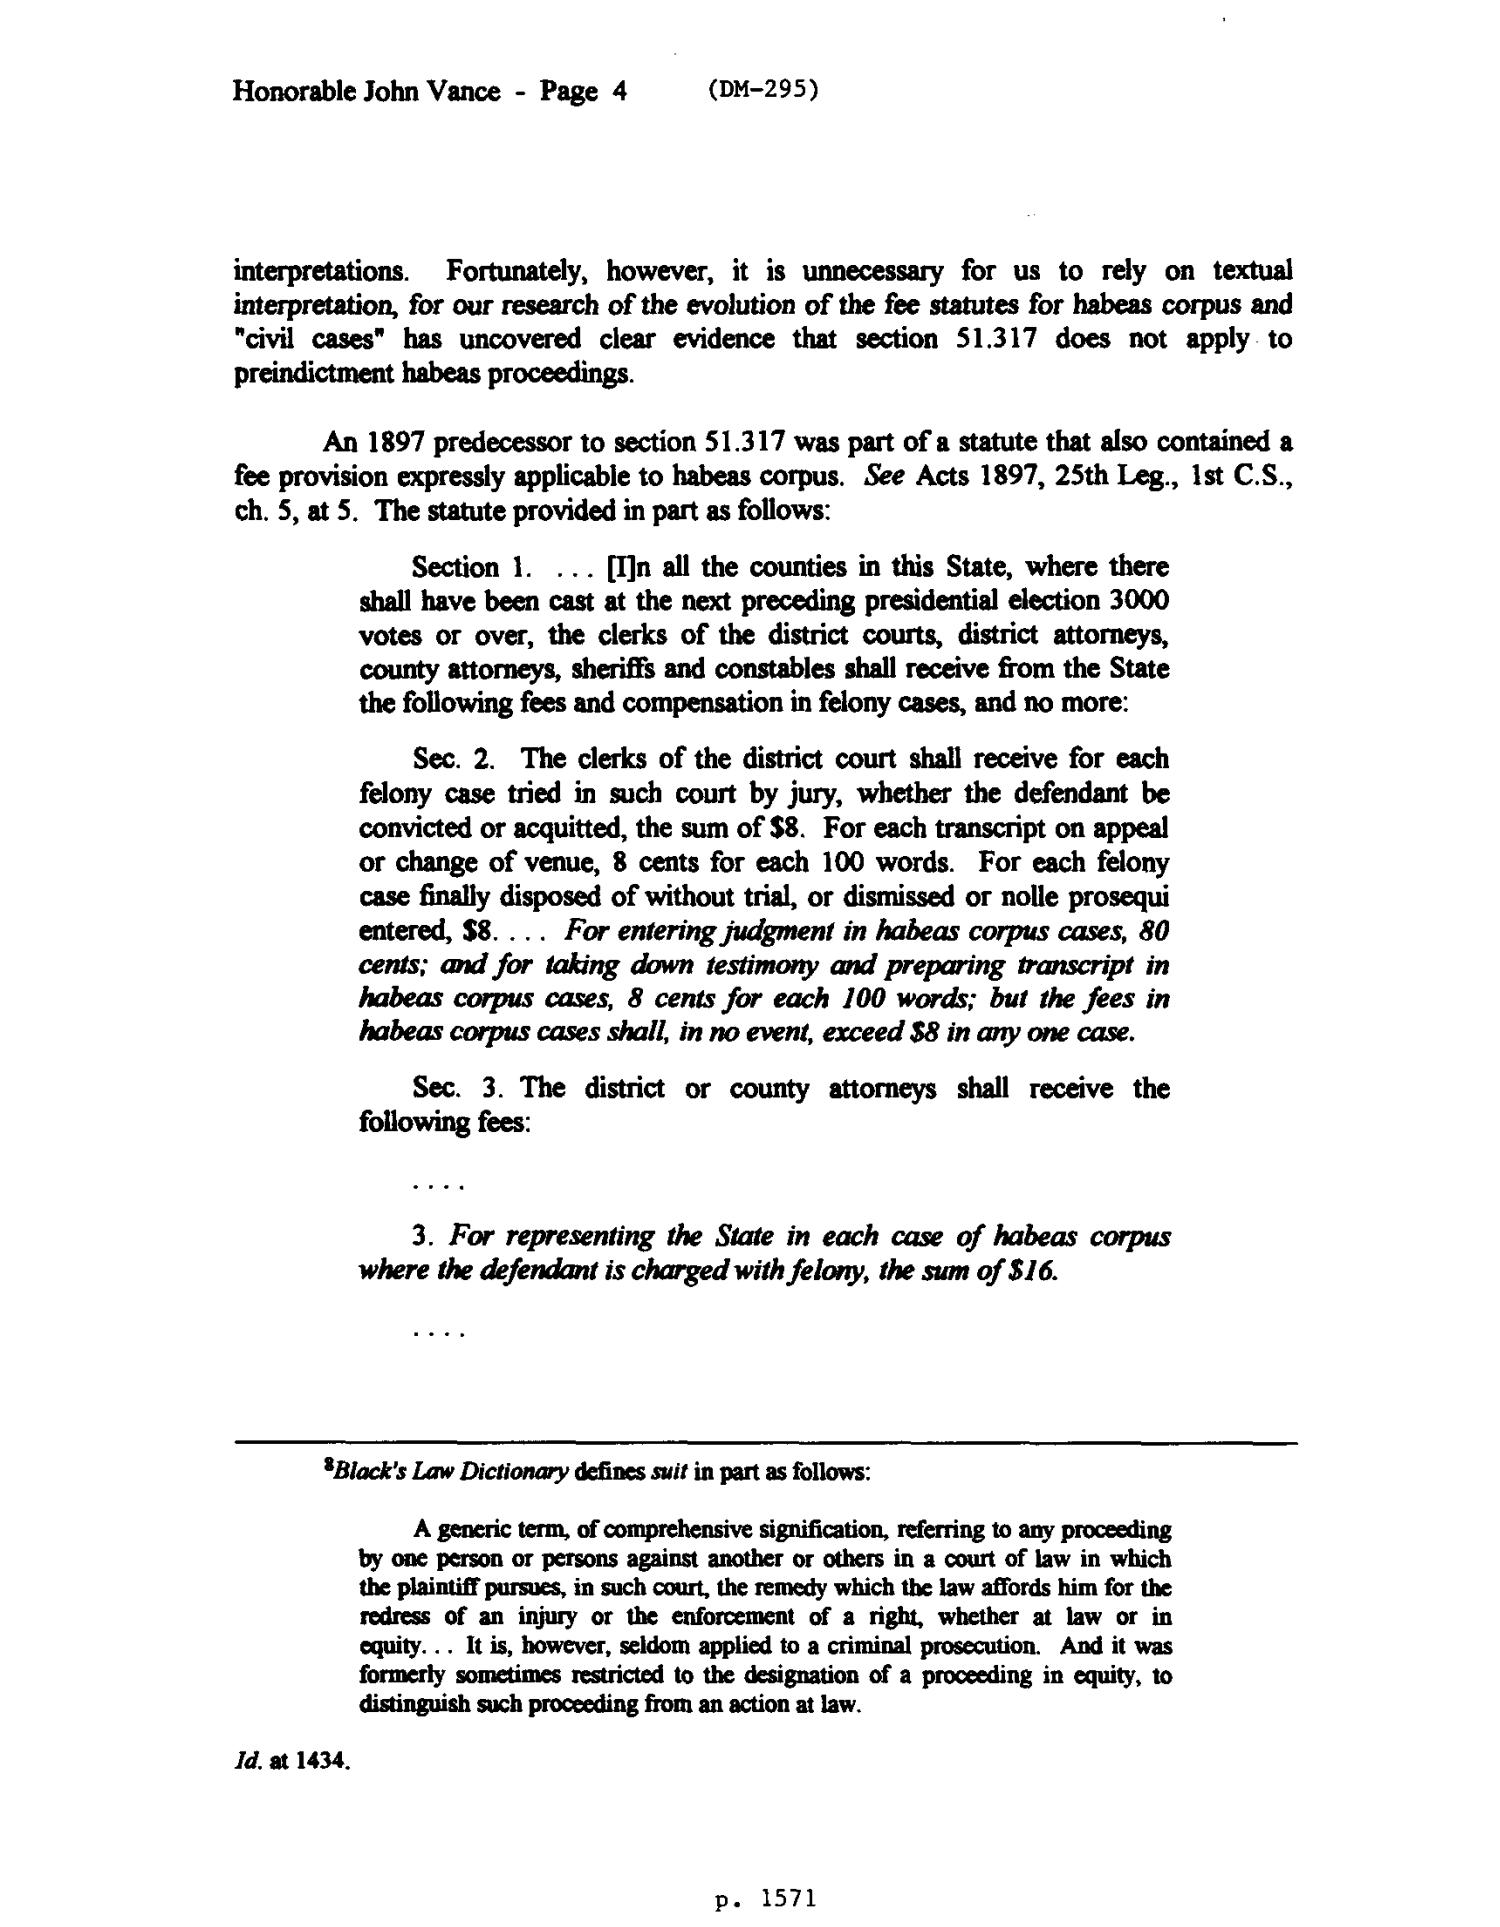 Texas Attorney General Opinion: DM-295
                                                
                                                    [Sequence #]: 4 of 14
                                                